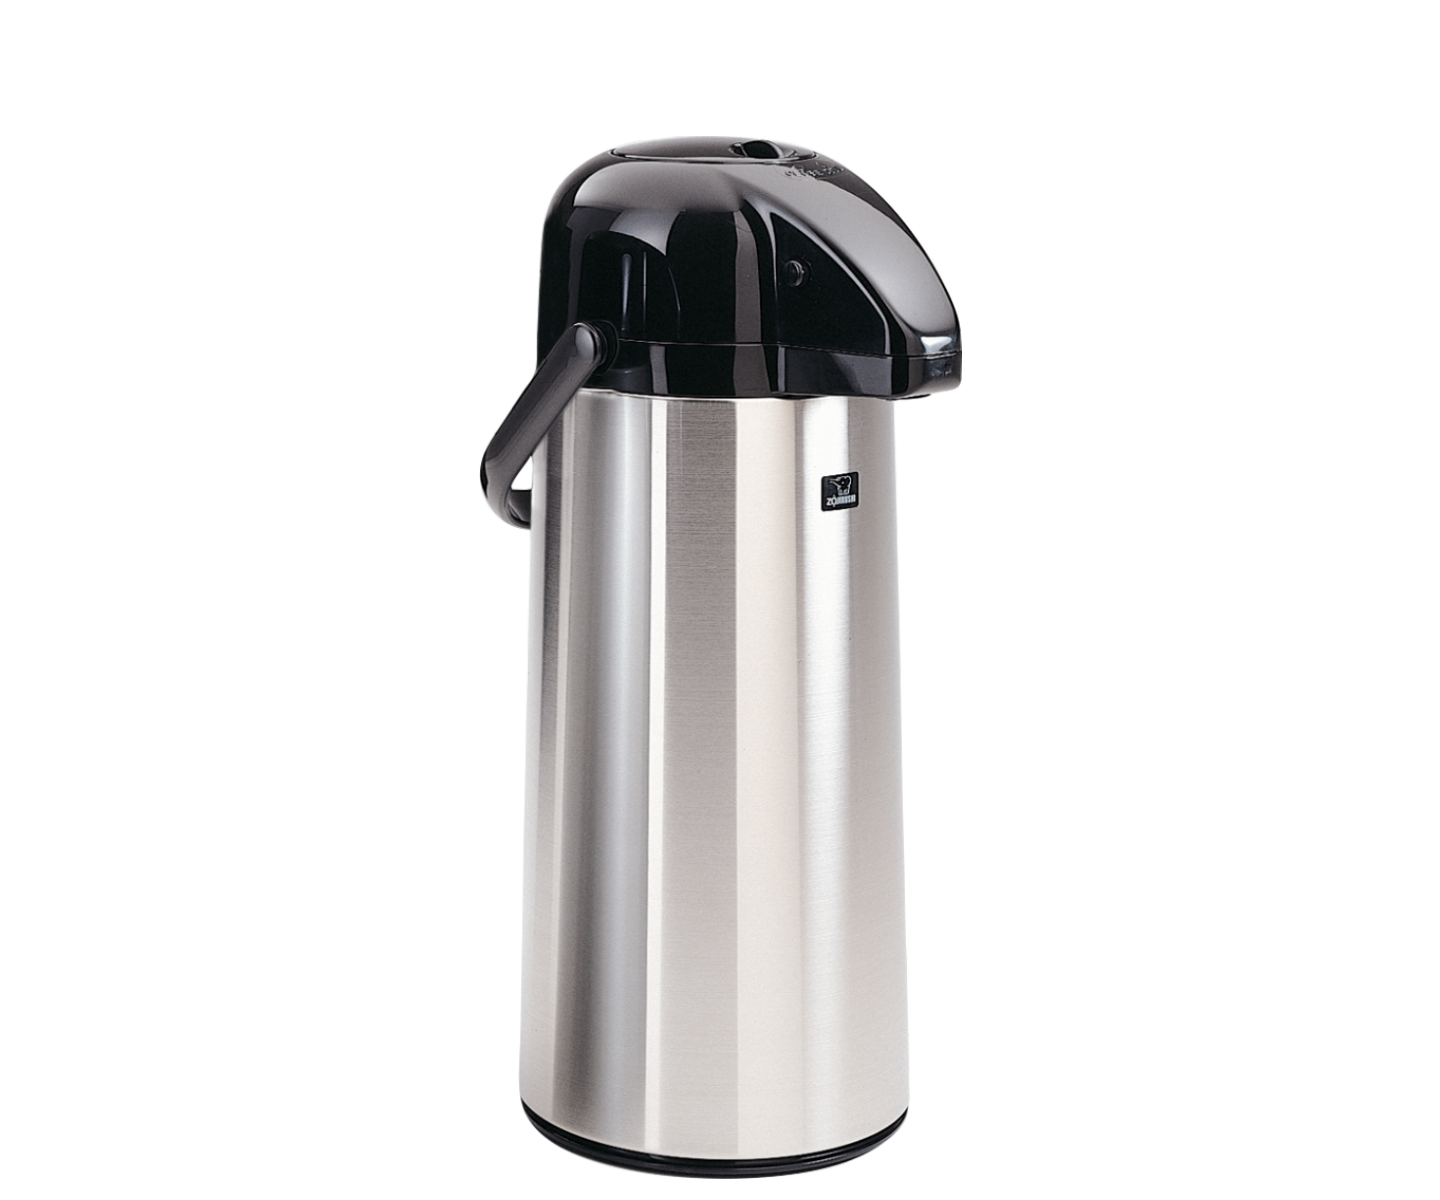 Find The Best Coffee Airpot Dispenser: Pros & Cons